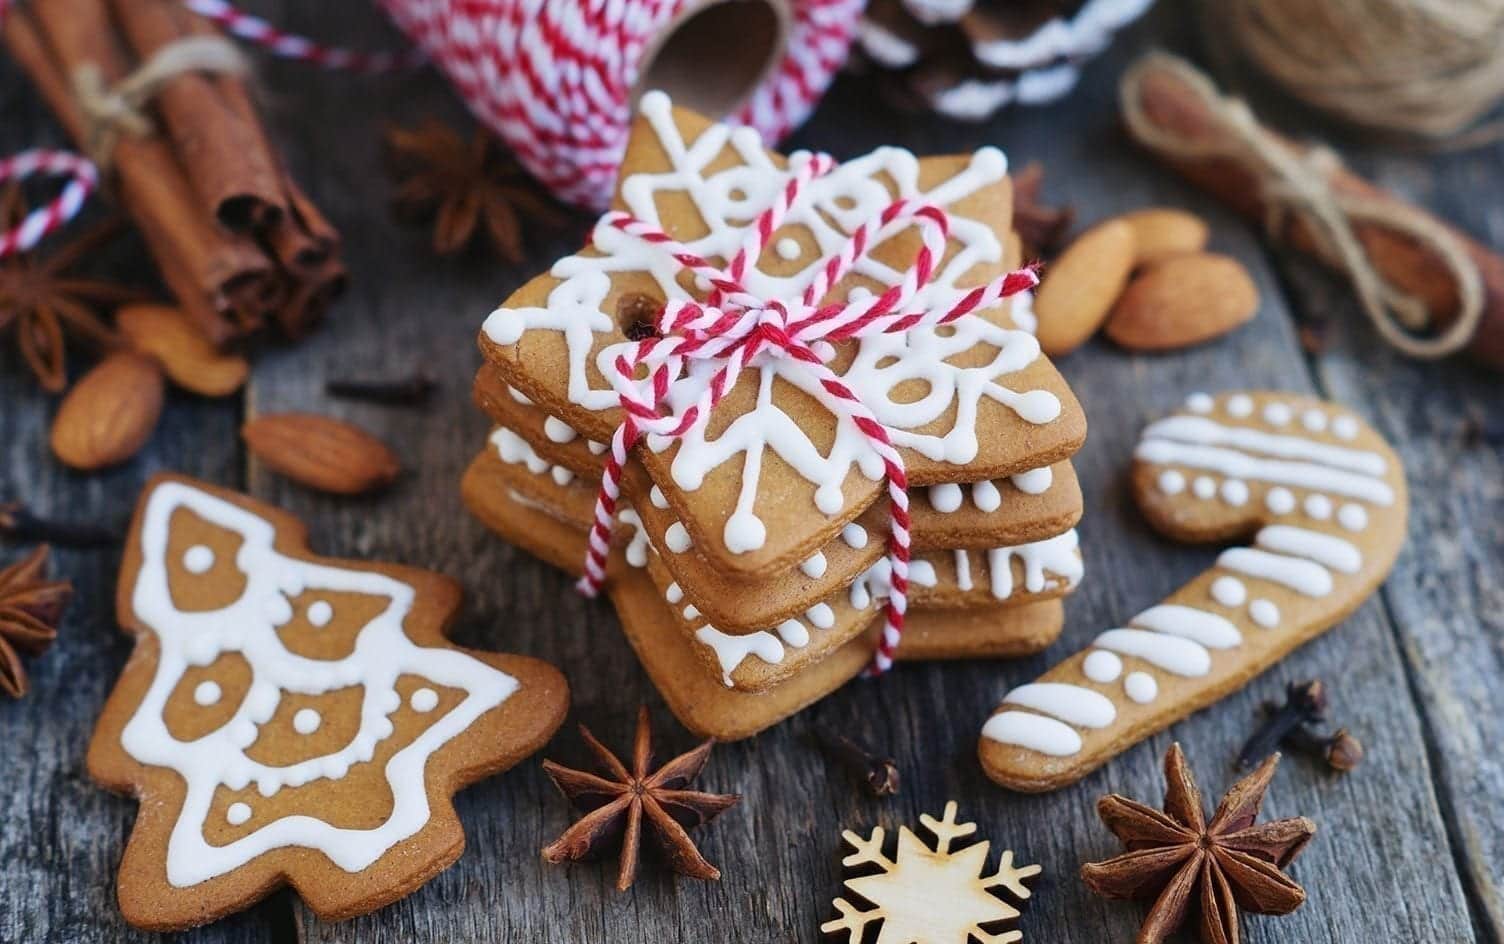 Surprising Health Benefits in Those Decadent Holiday Foods